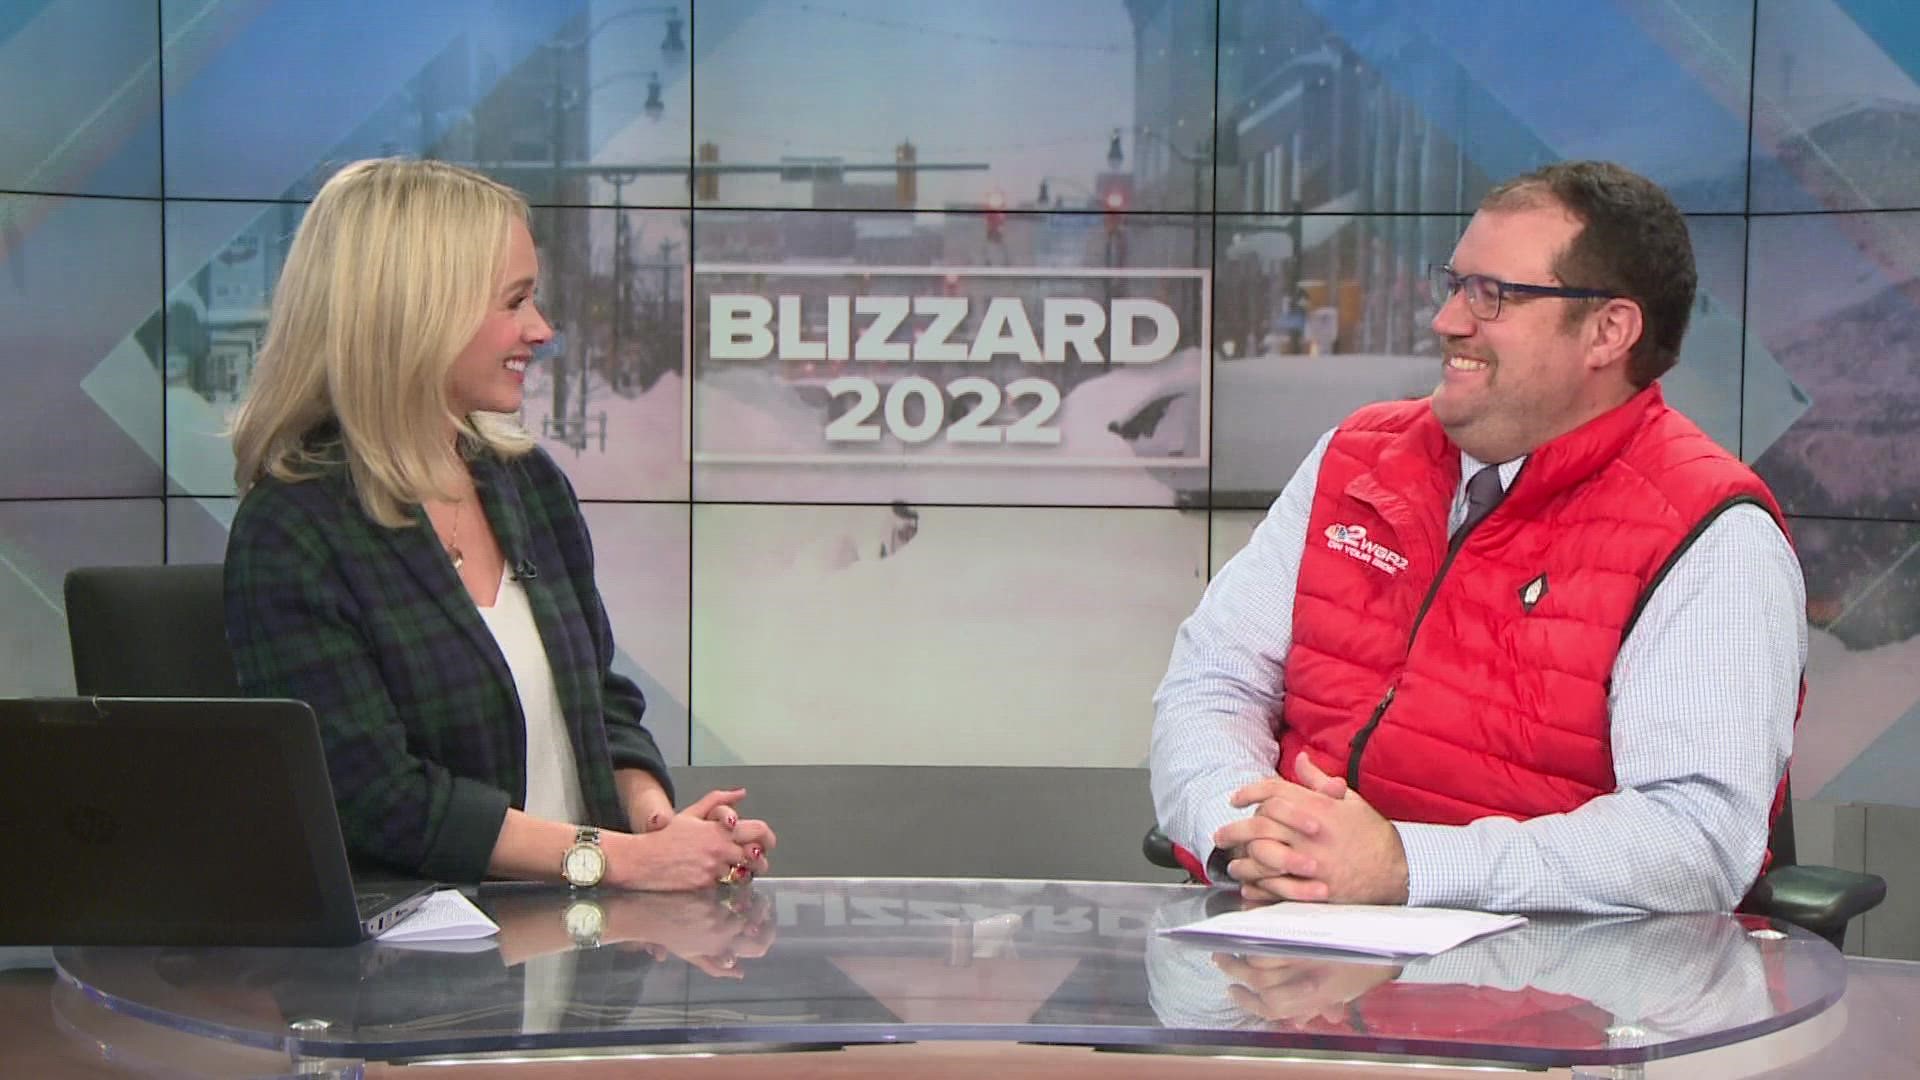 2 On Your Side's Nate Benson joined the Town Hall to discuss working through blizzard, from home.